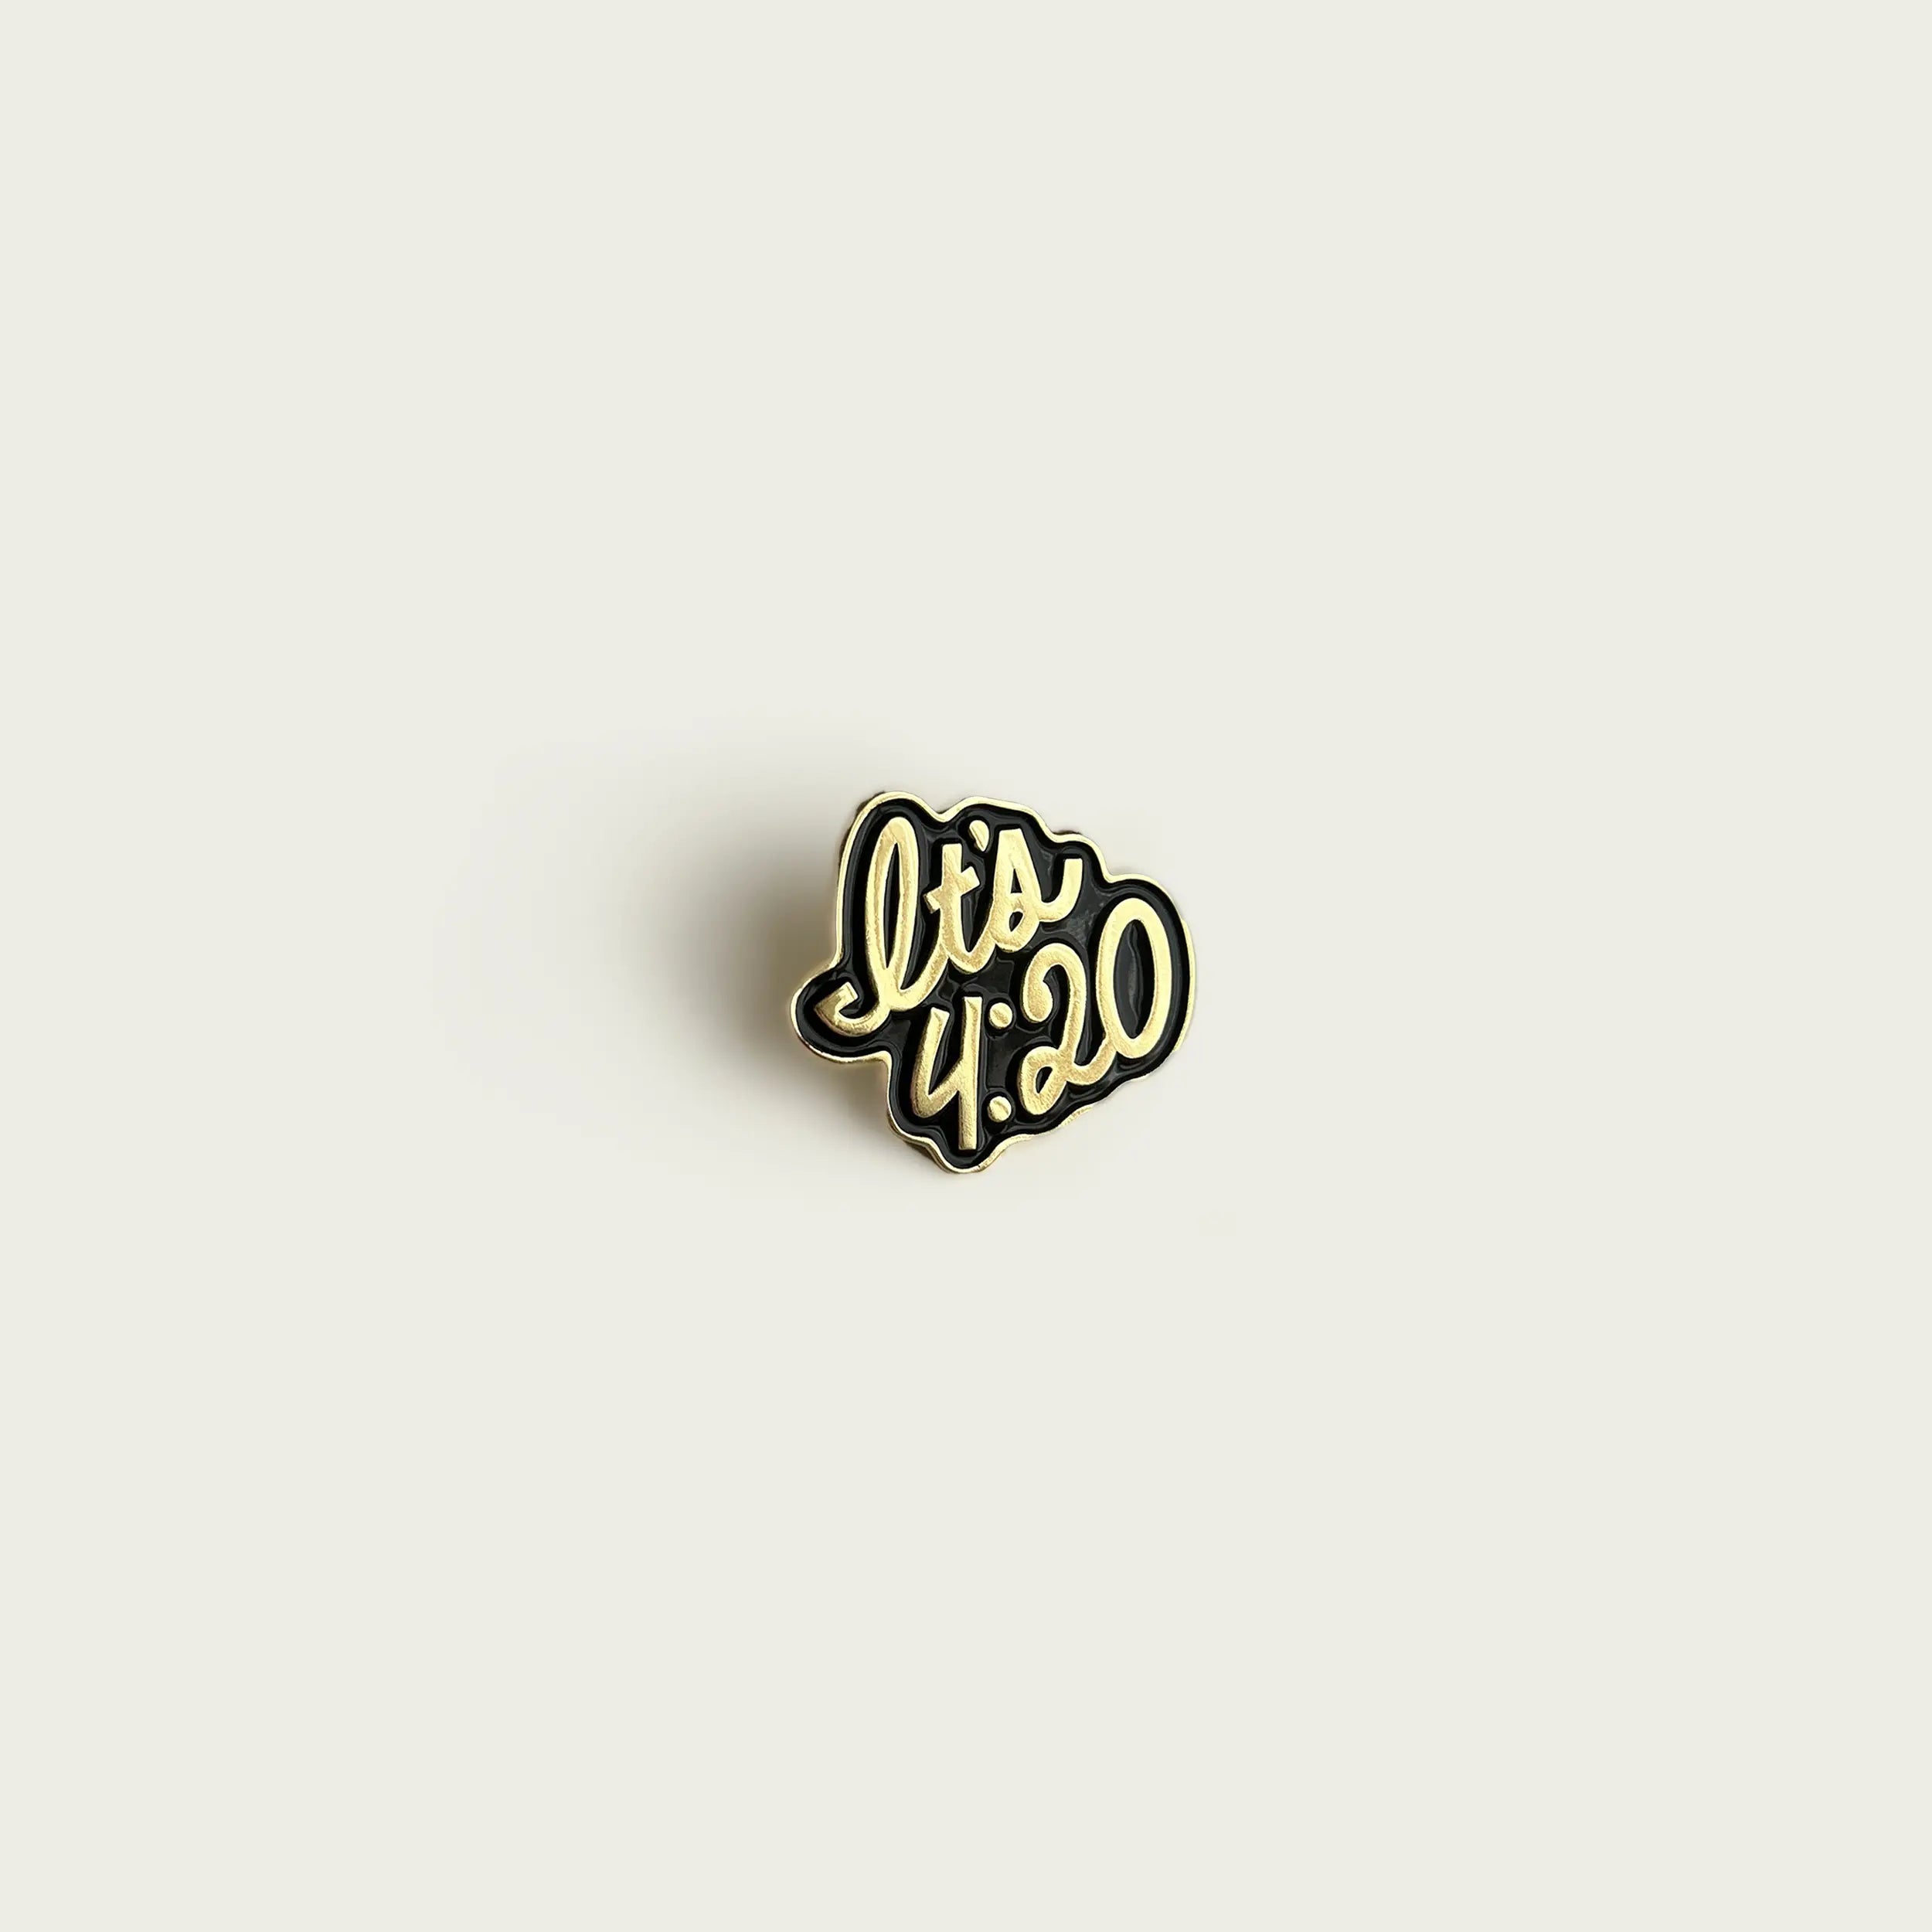 It's 4:20' enamel pin for cannabis enthusiasts